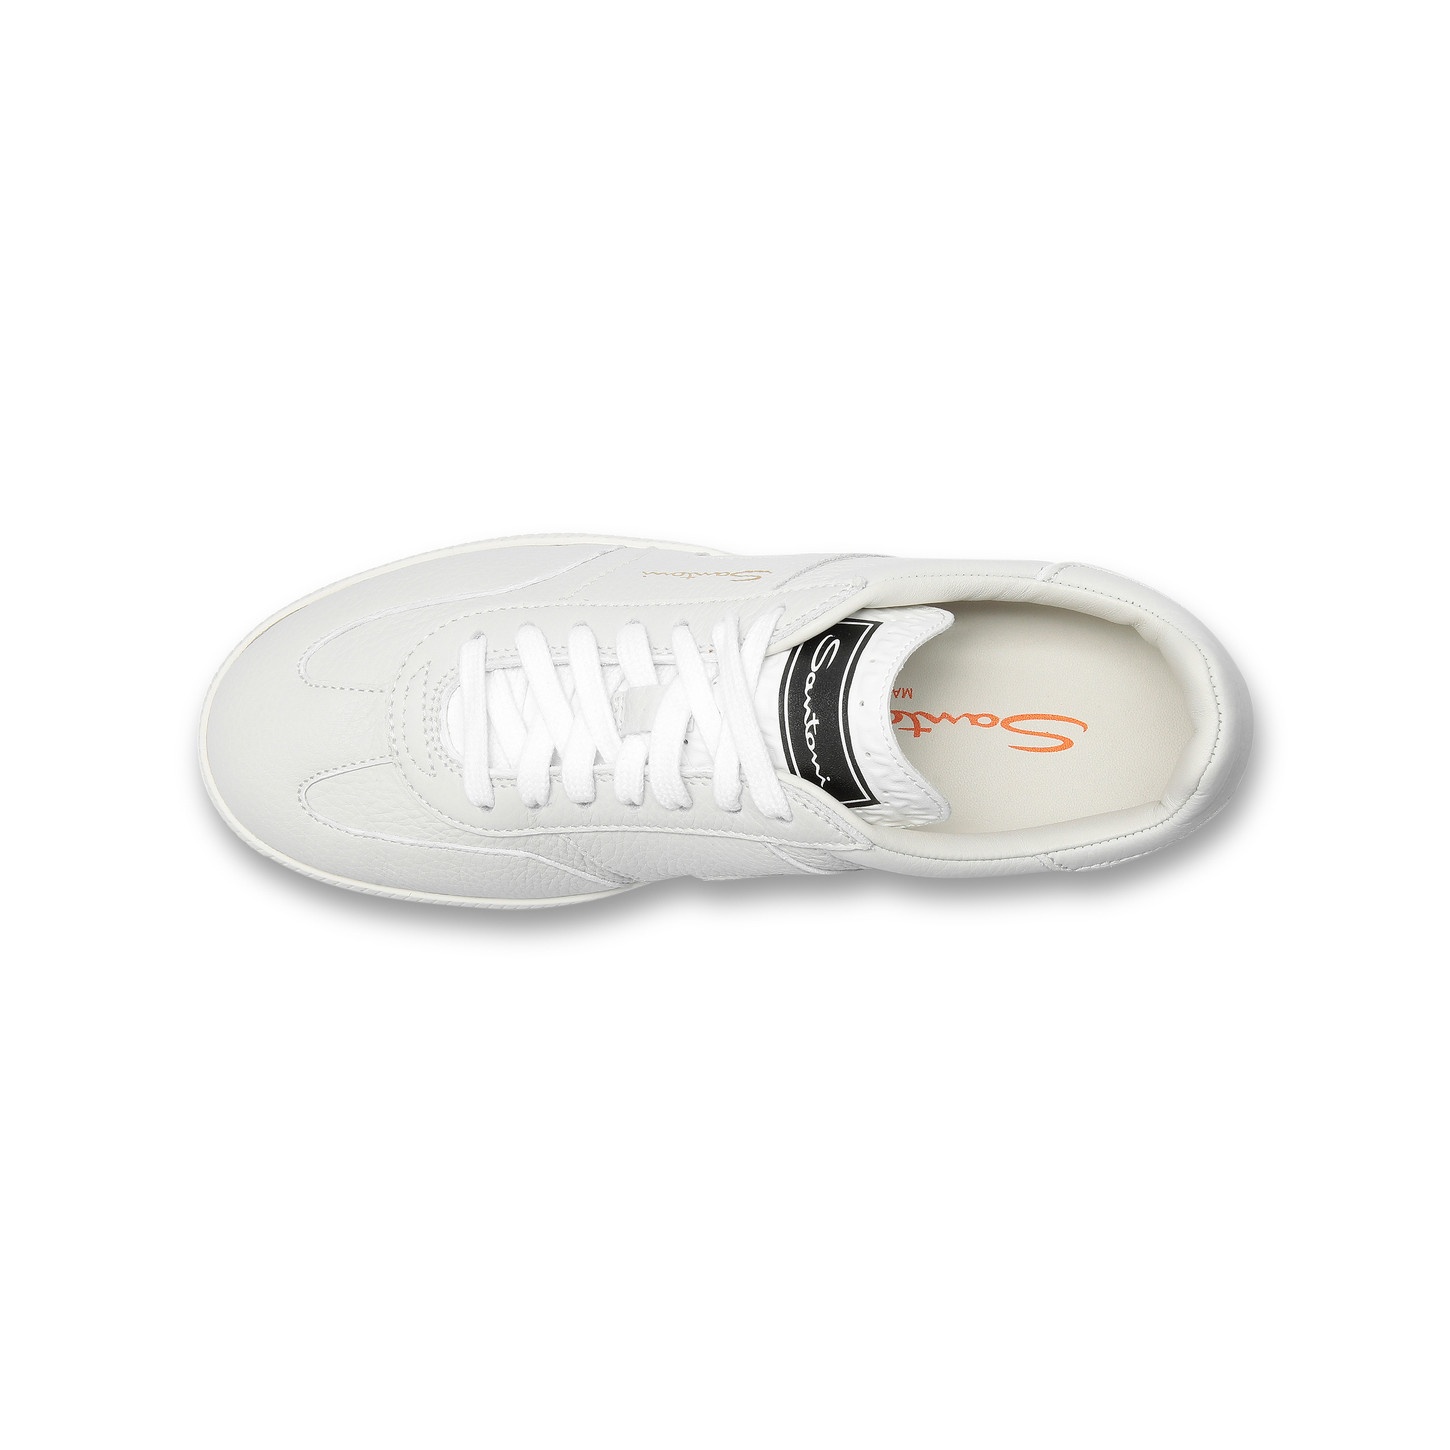 Women's white leather DBS Oly sneaker - 5